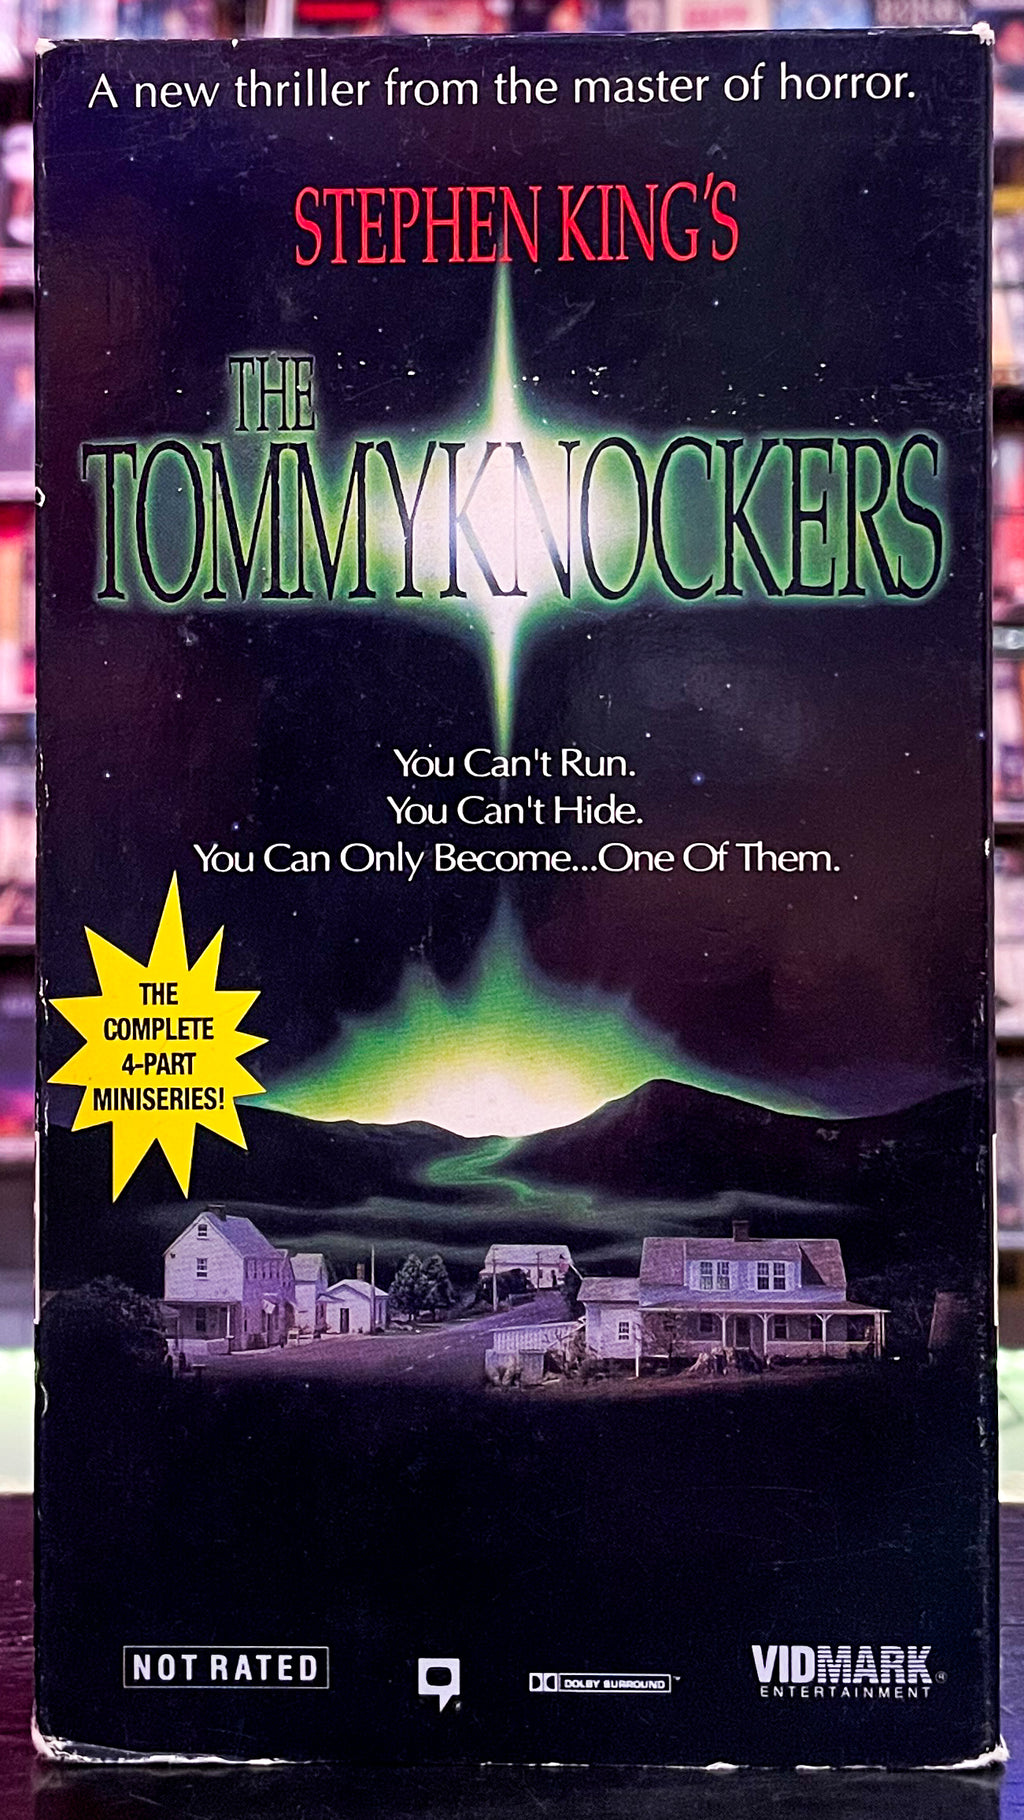 Stephen King’s The Tommyknockers